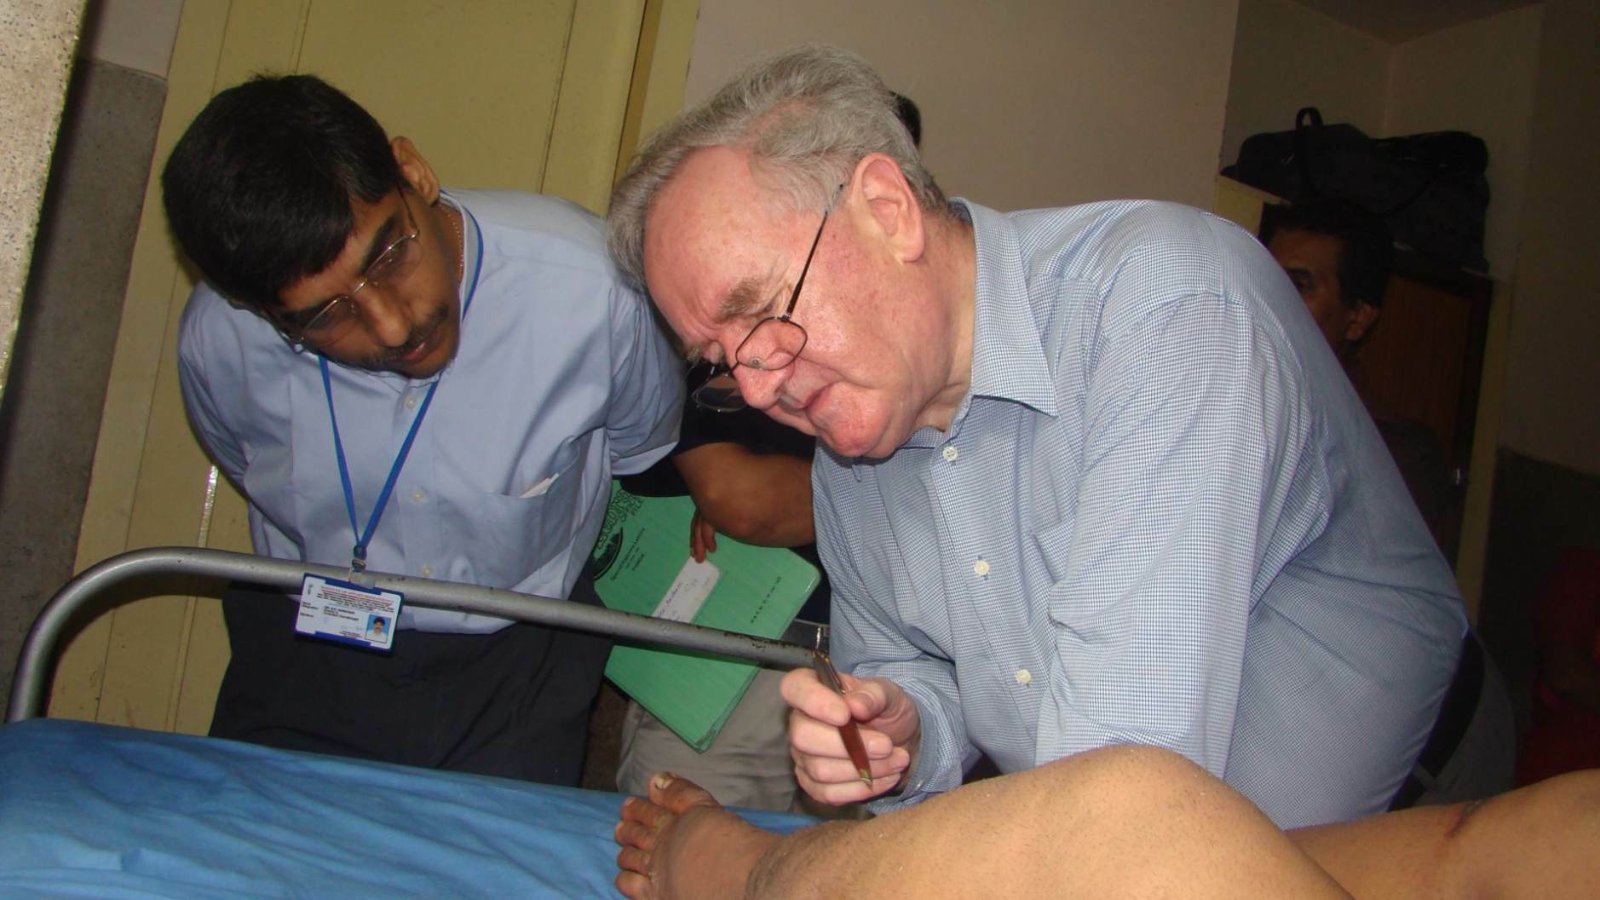 Institute of Applied Dermatology (IAD) Kerala Director Dr S R Narahari and his mentor Professor Terence Ryan of Oxford University, United Kingdom attending to a Lymphedema patient at IAD campus in Kasargod, Kerala.